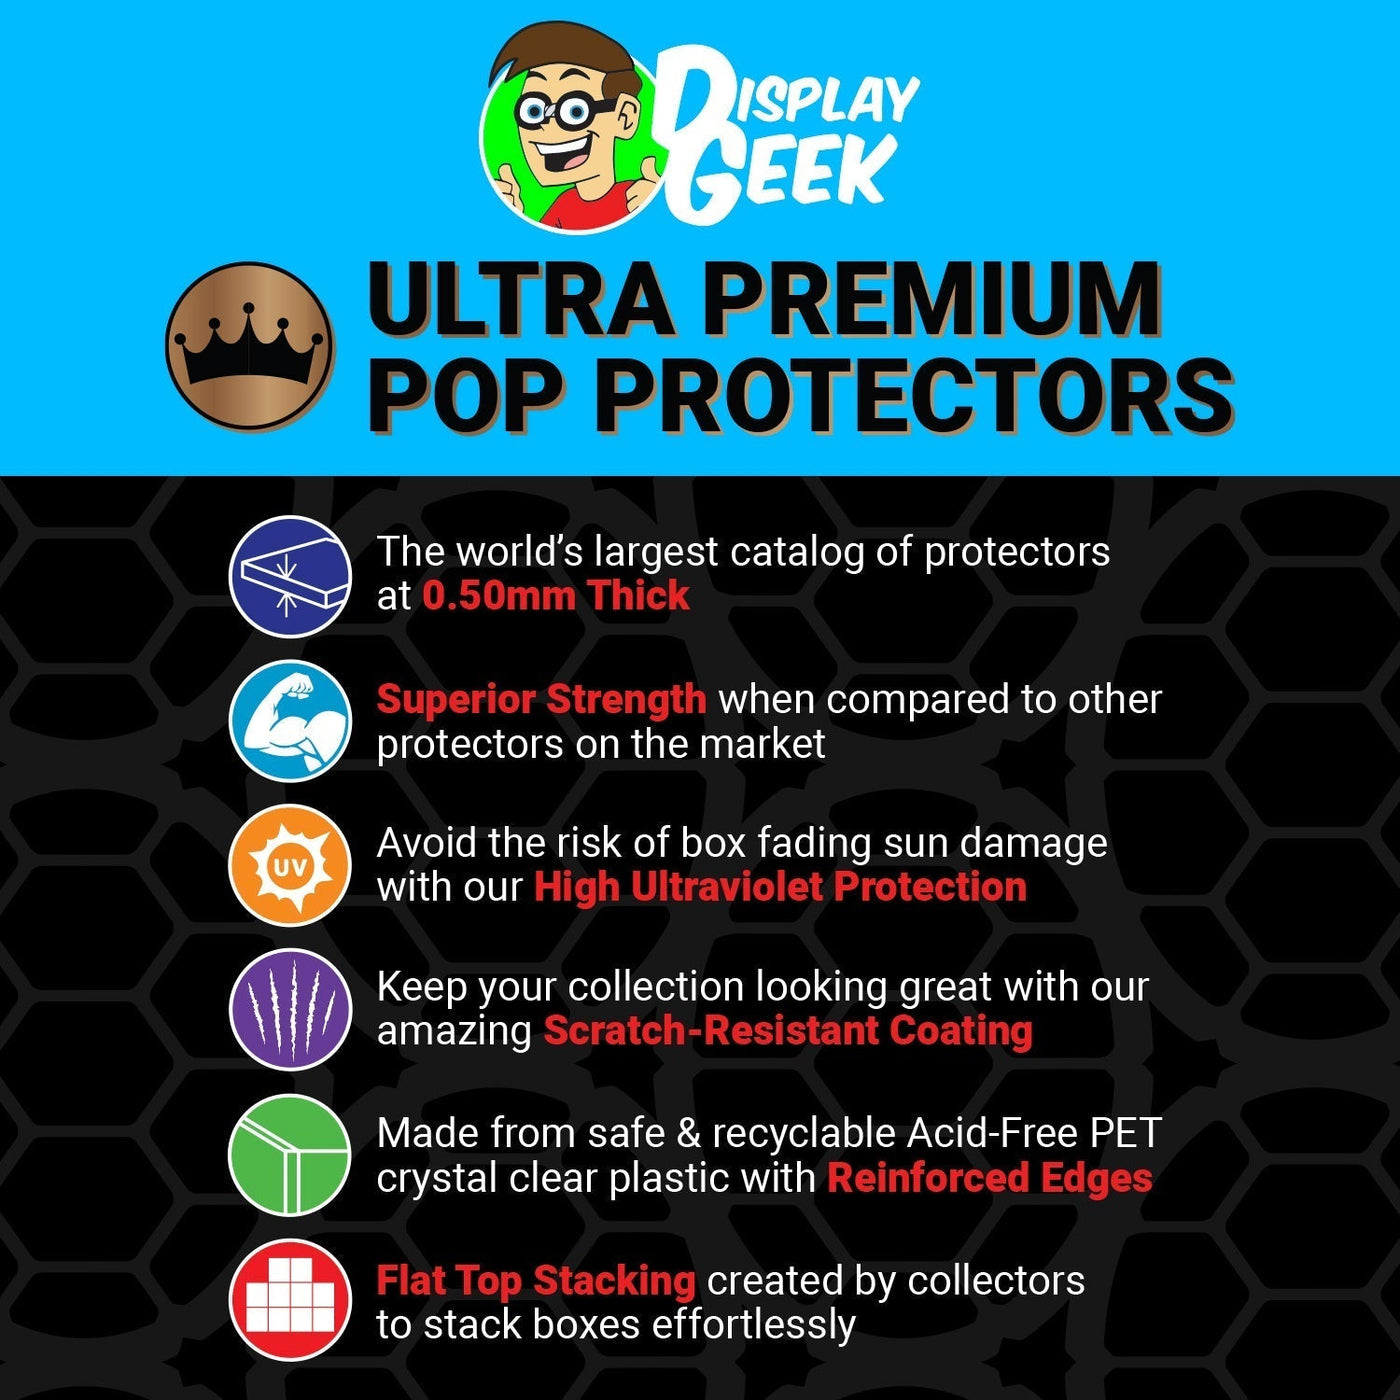 Pop Protector for 2 Pack Baby & Johnny Funko Pop on The Protector Guide App by Display Geek